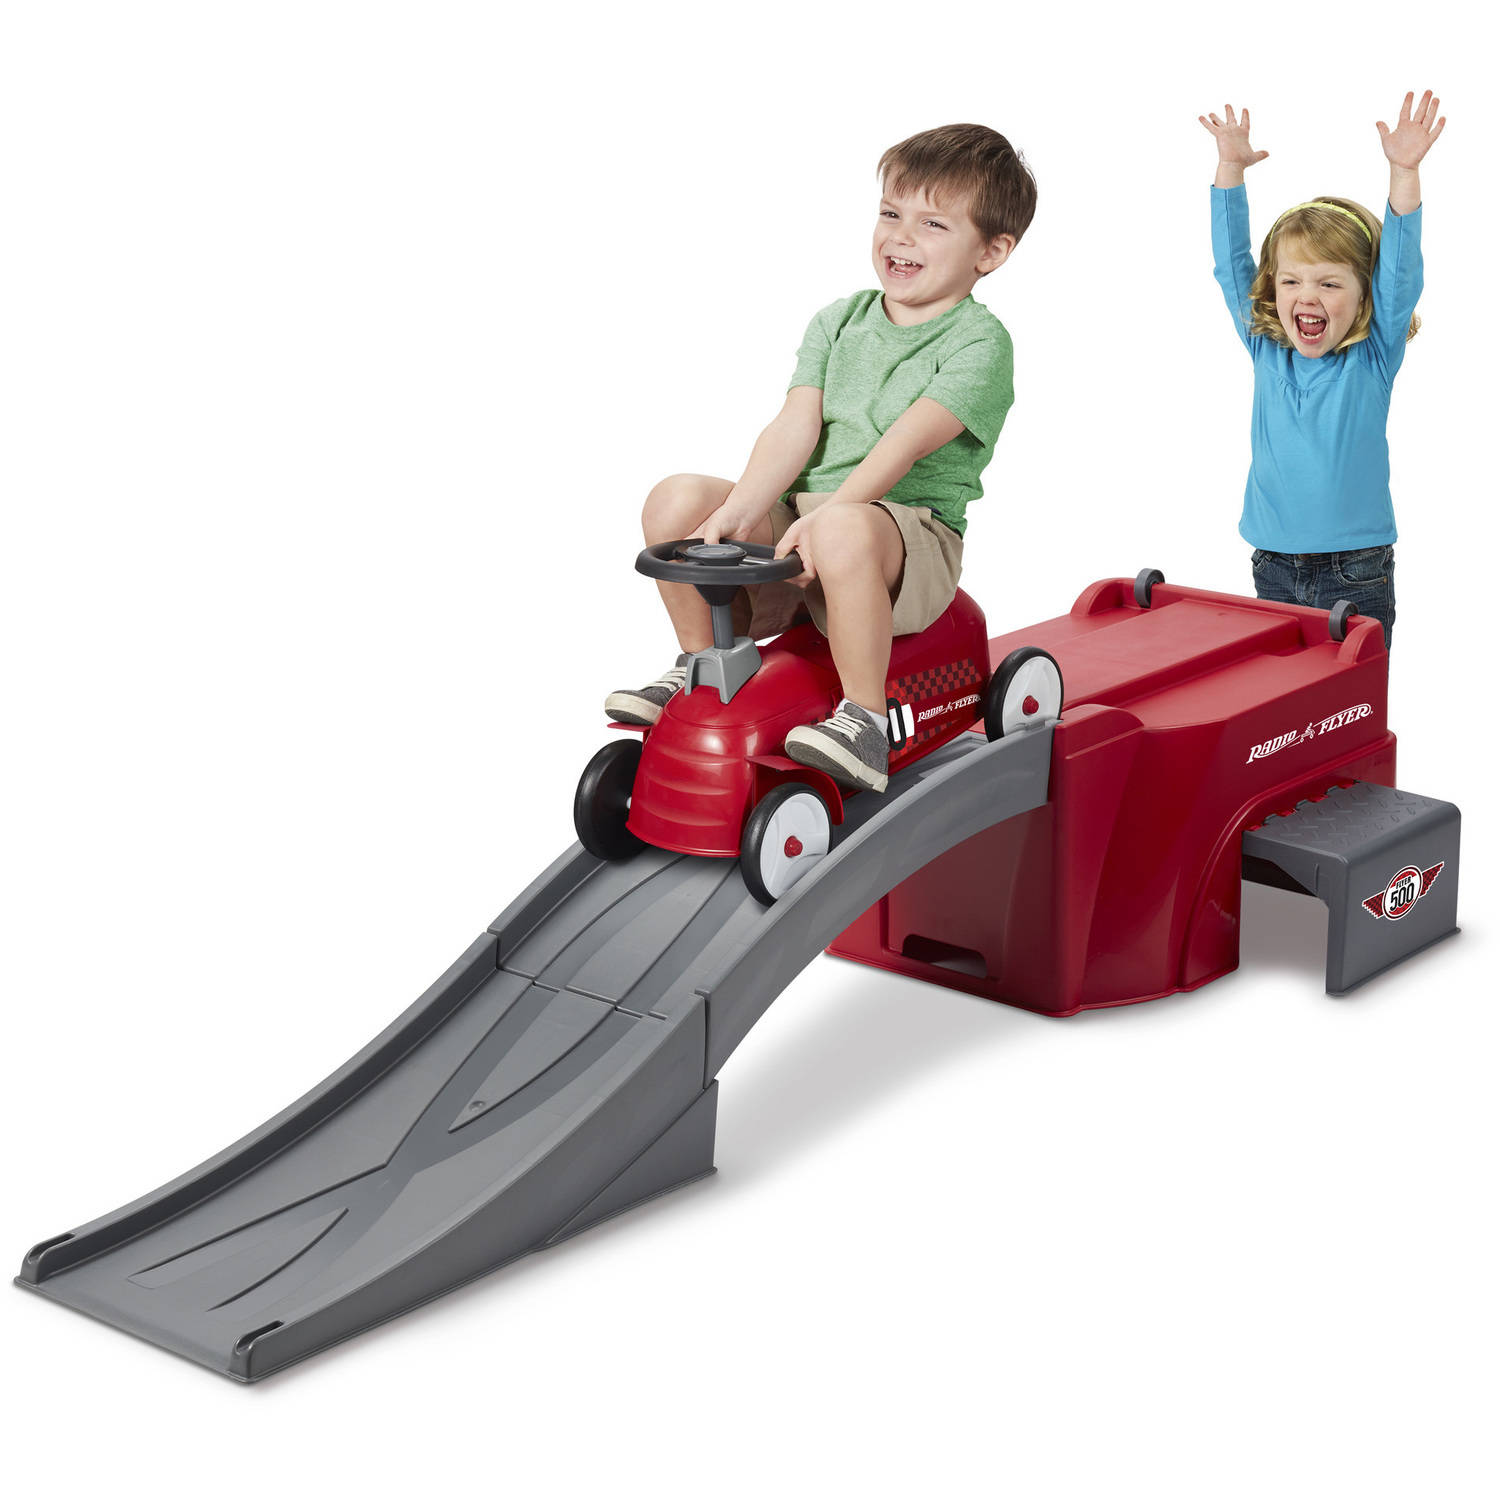 Radio Flyer, Flyer 500 Ride-on with Ramp and Car, Red - image 3 of 8